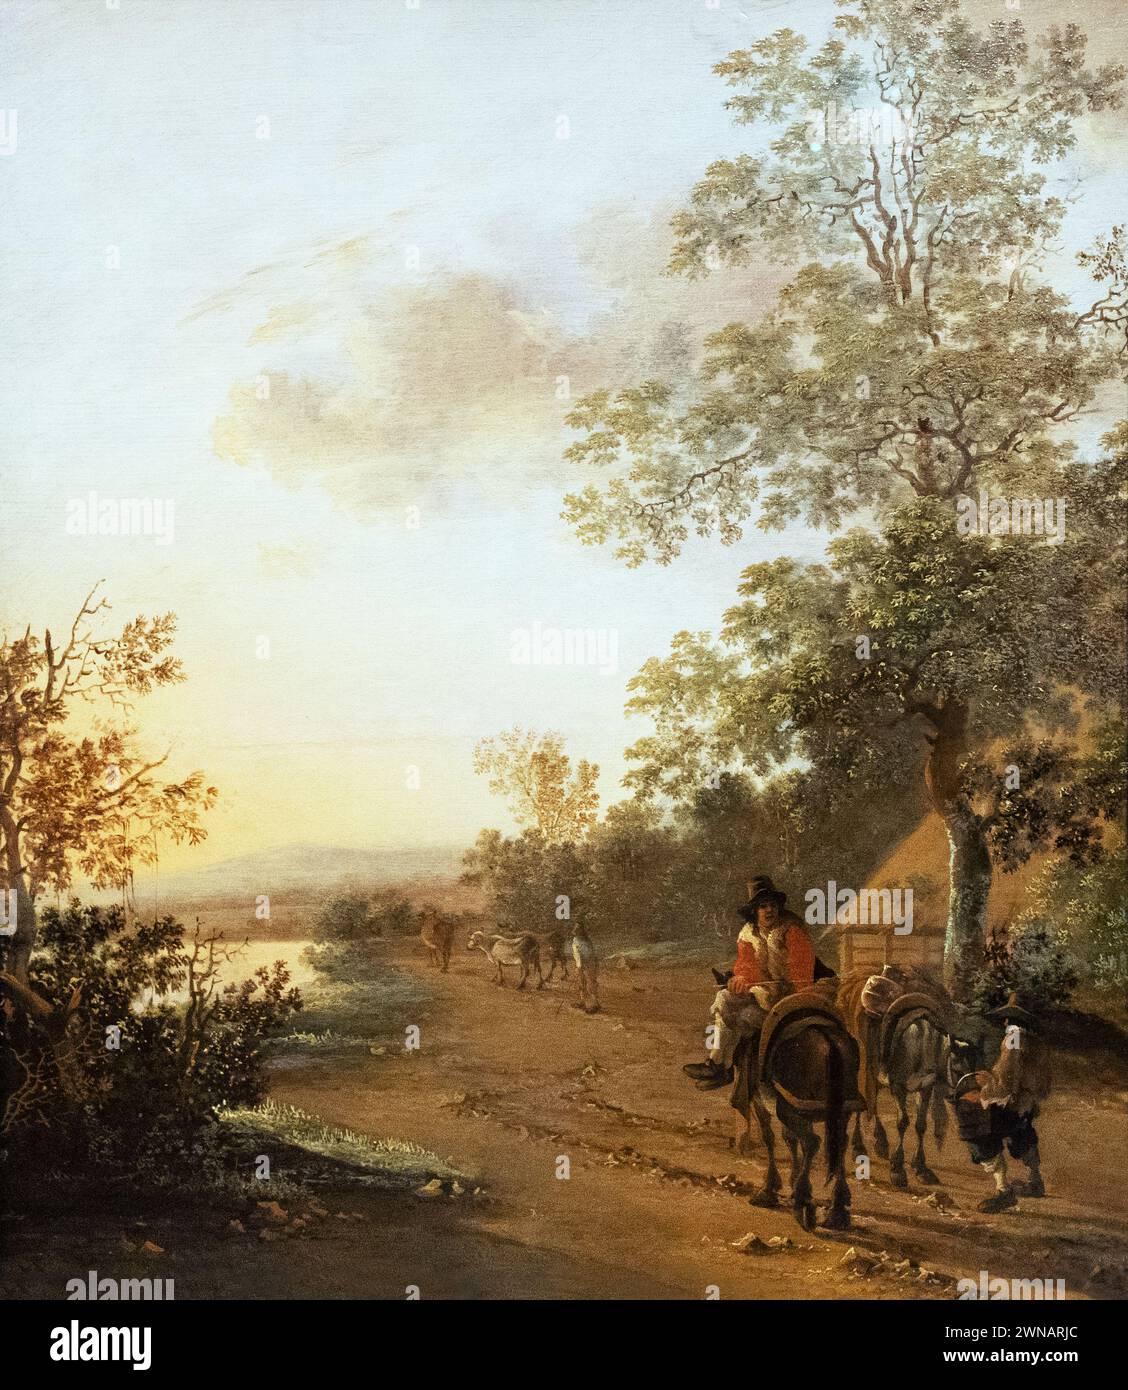 Jan Dirksz Both, or Jan Both painting, 'Road by the edge of a Lake' c 1640; Italianate landscape painting by Dutch painter, 17th century. Stock Photo